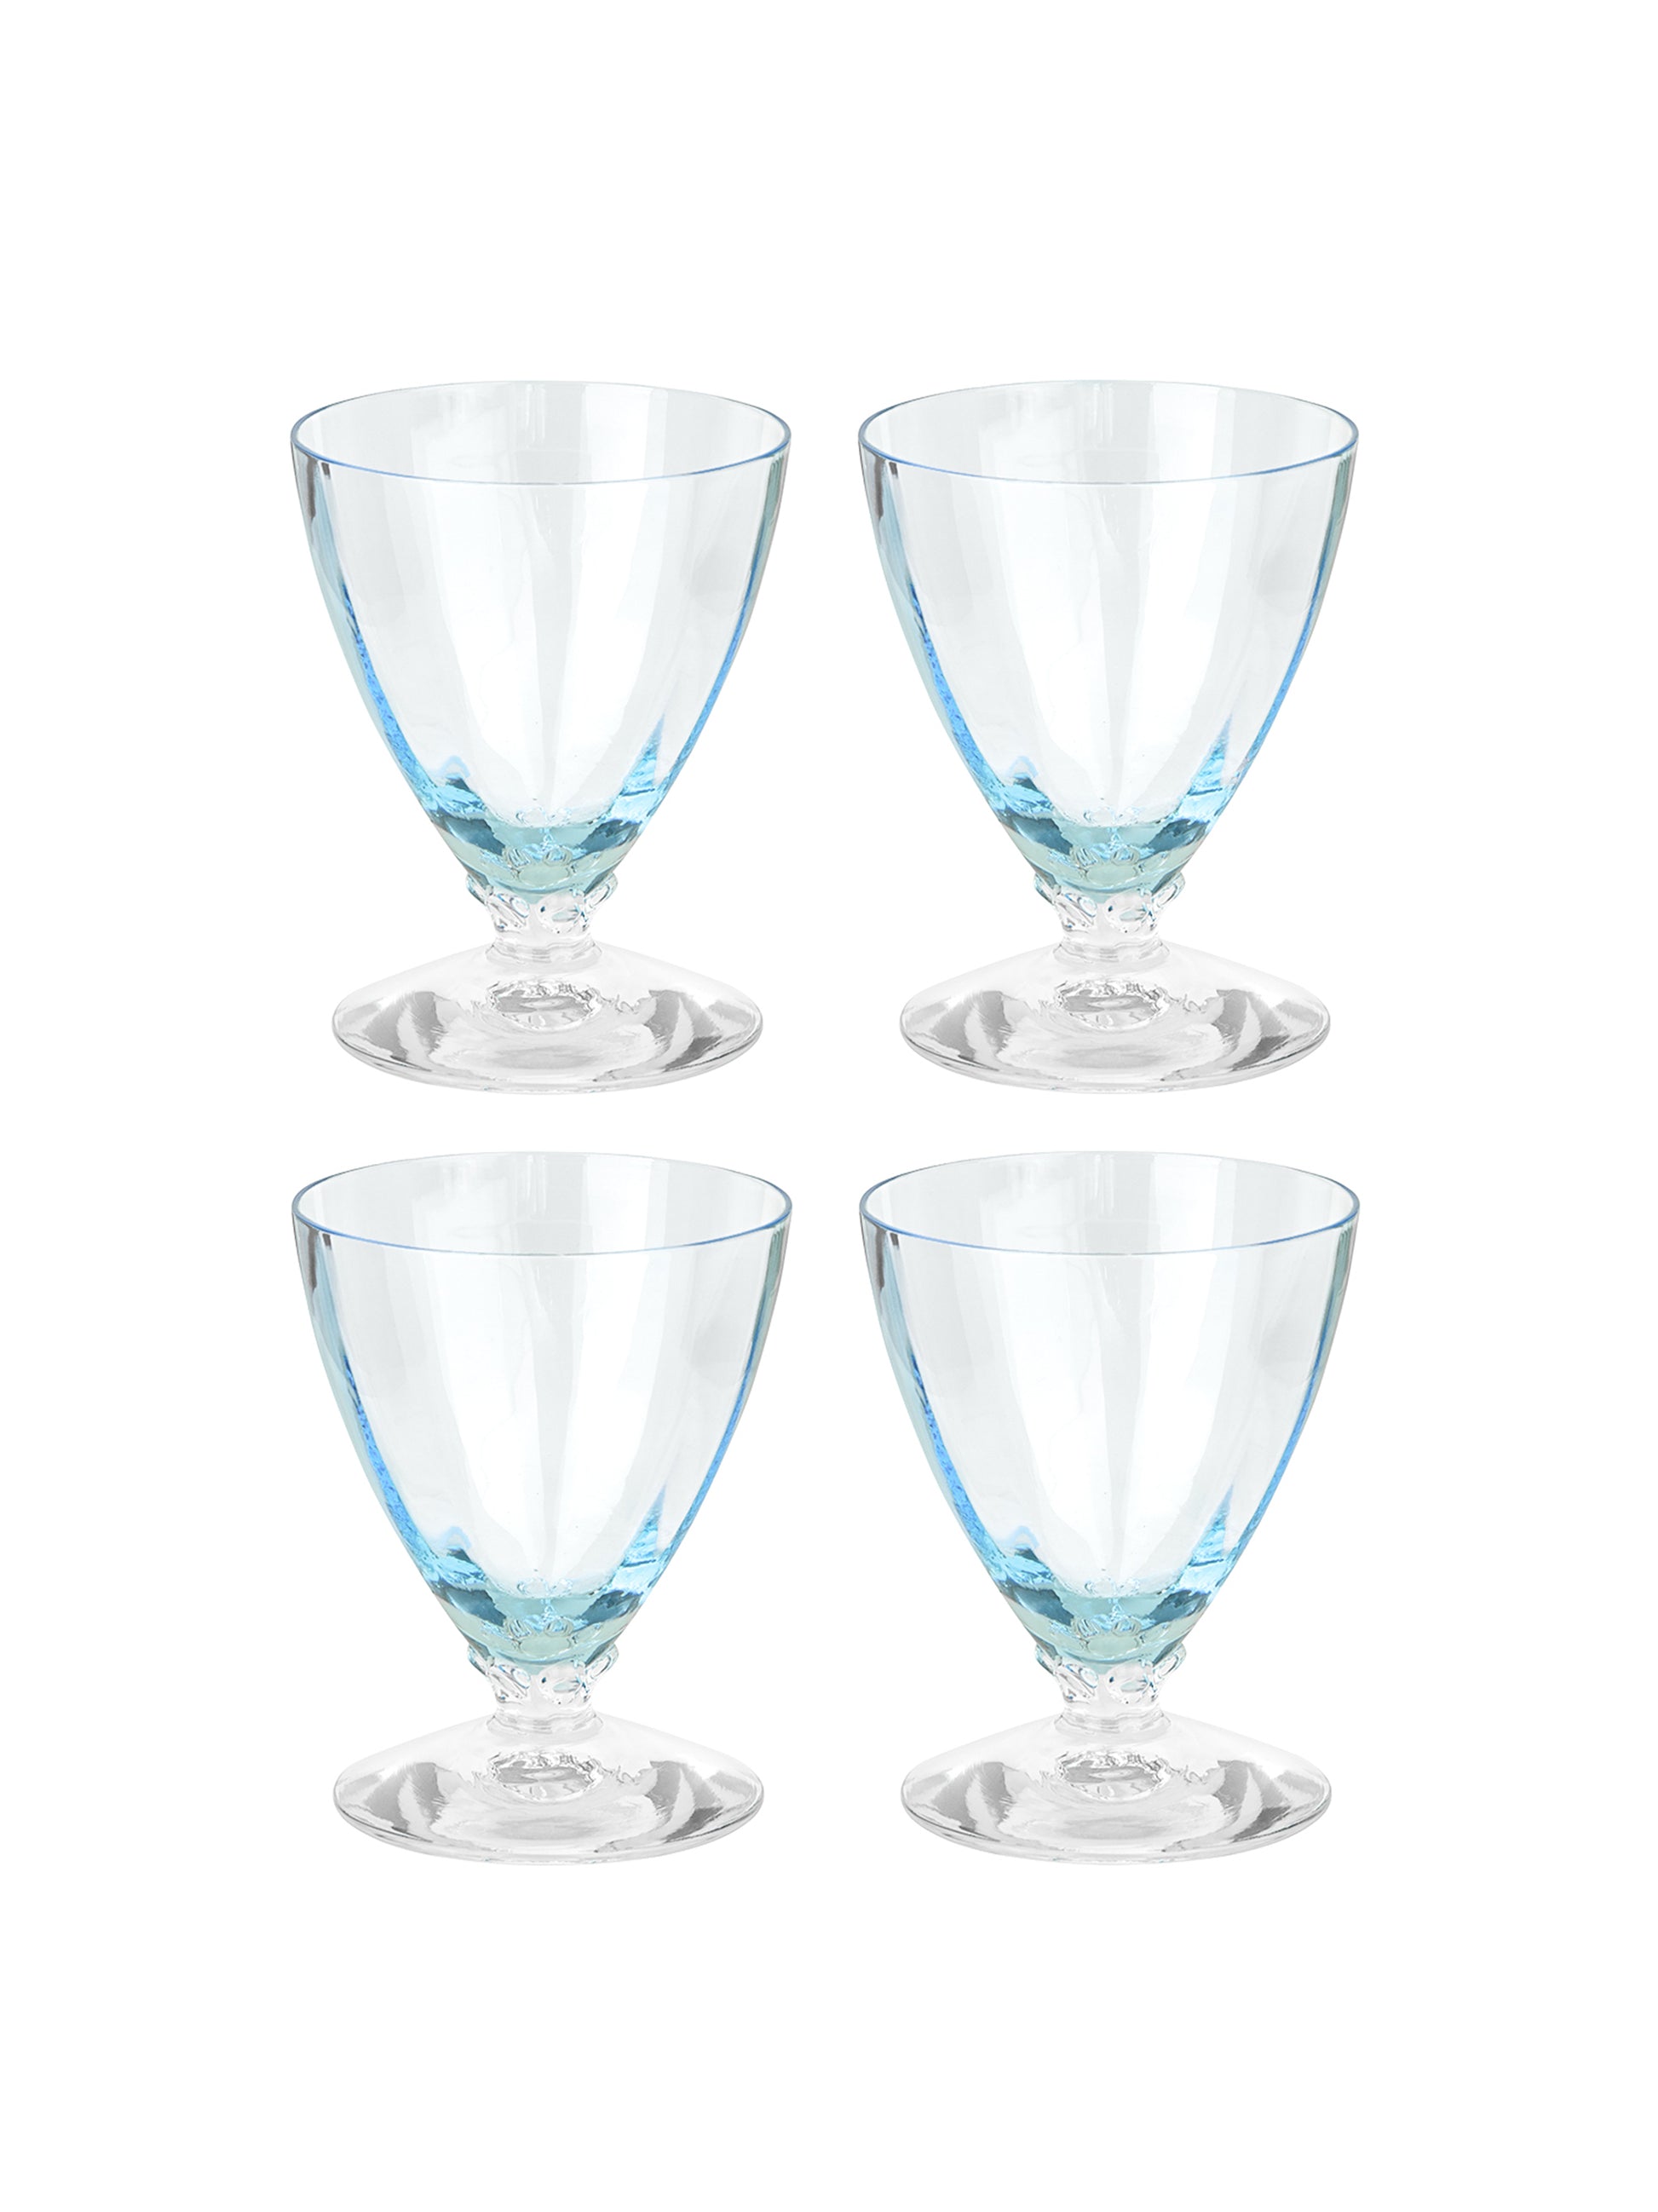 https://westontable.com/cdn/shop/products/Vintage-1920s-Fairfax-Oyster-Cocktail-Glasses-Weston-Table-SP-2_83709bec-13f9-4707-a4e5-237d587229d6.jpg?v=1643827463&width=1946